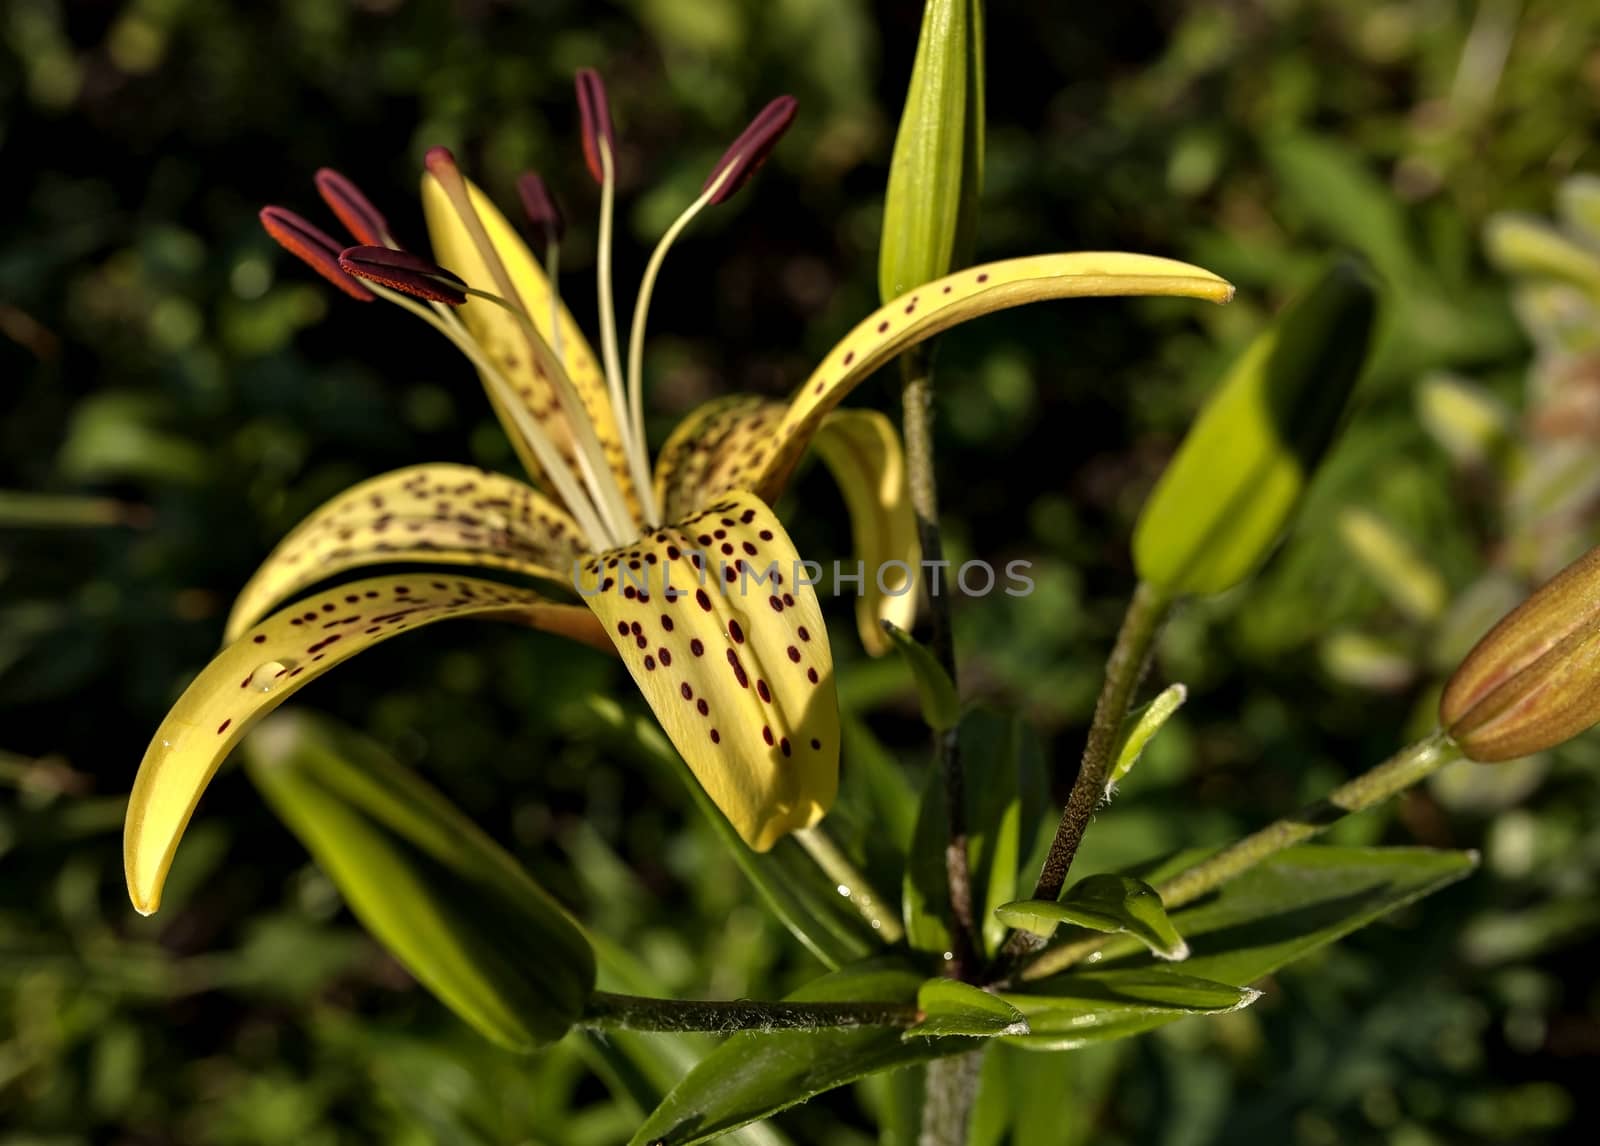 yellow tiger Lily with raindrops on the petals early morning, soft focus